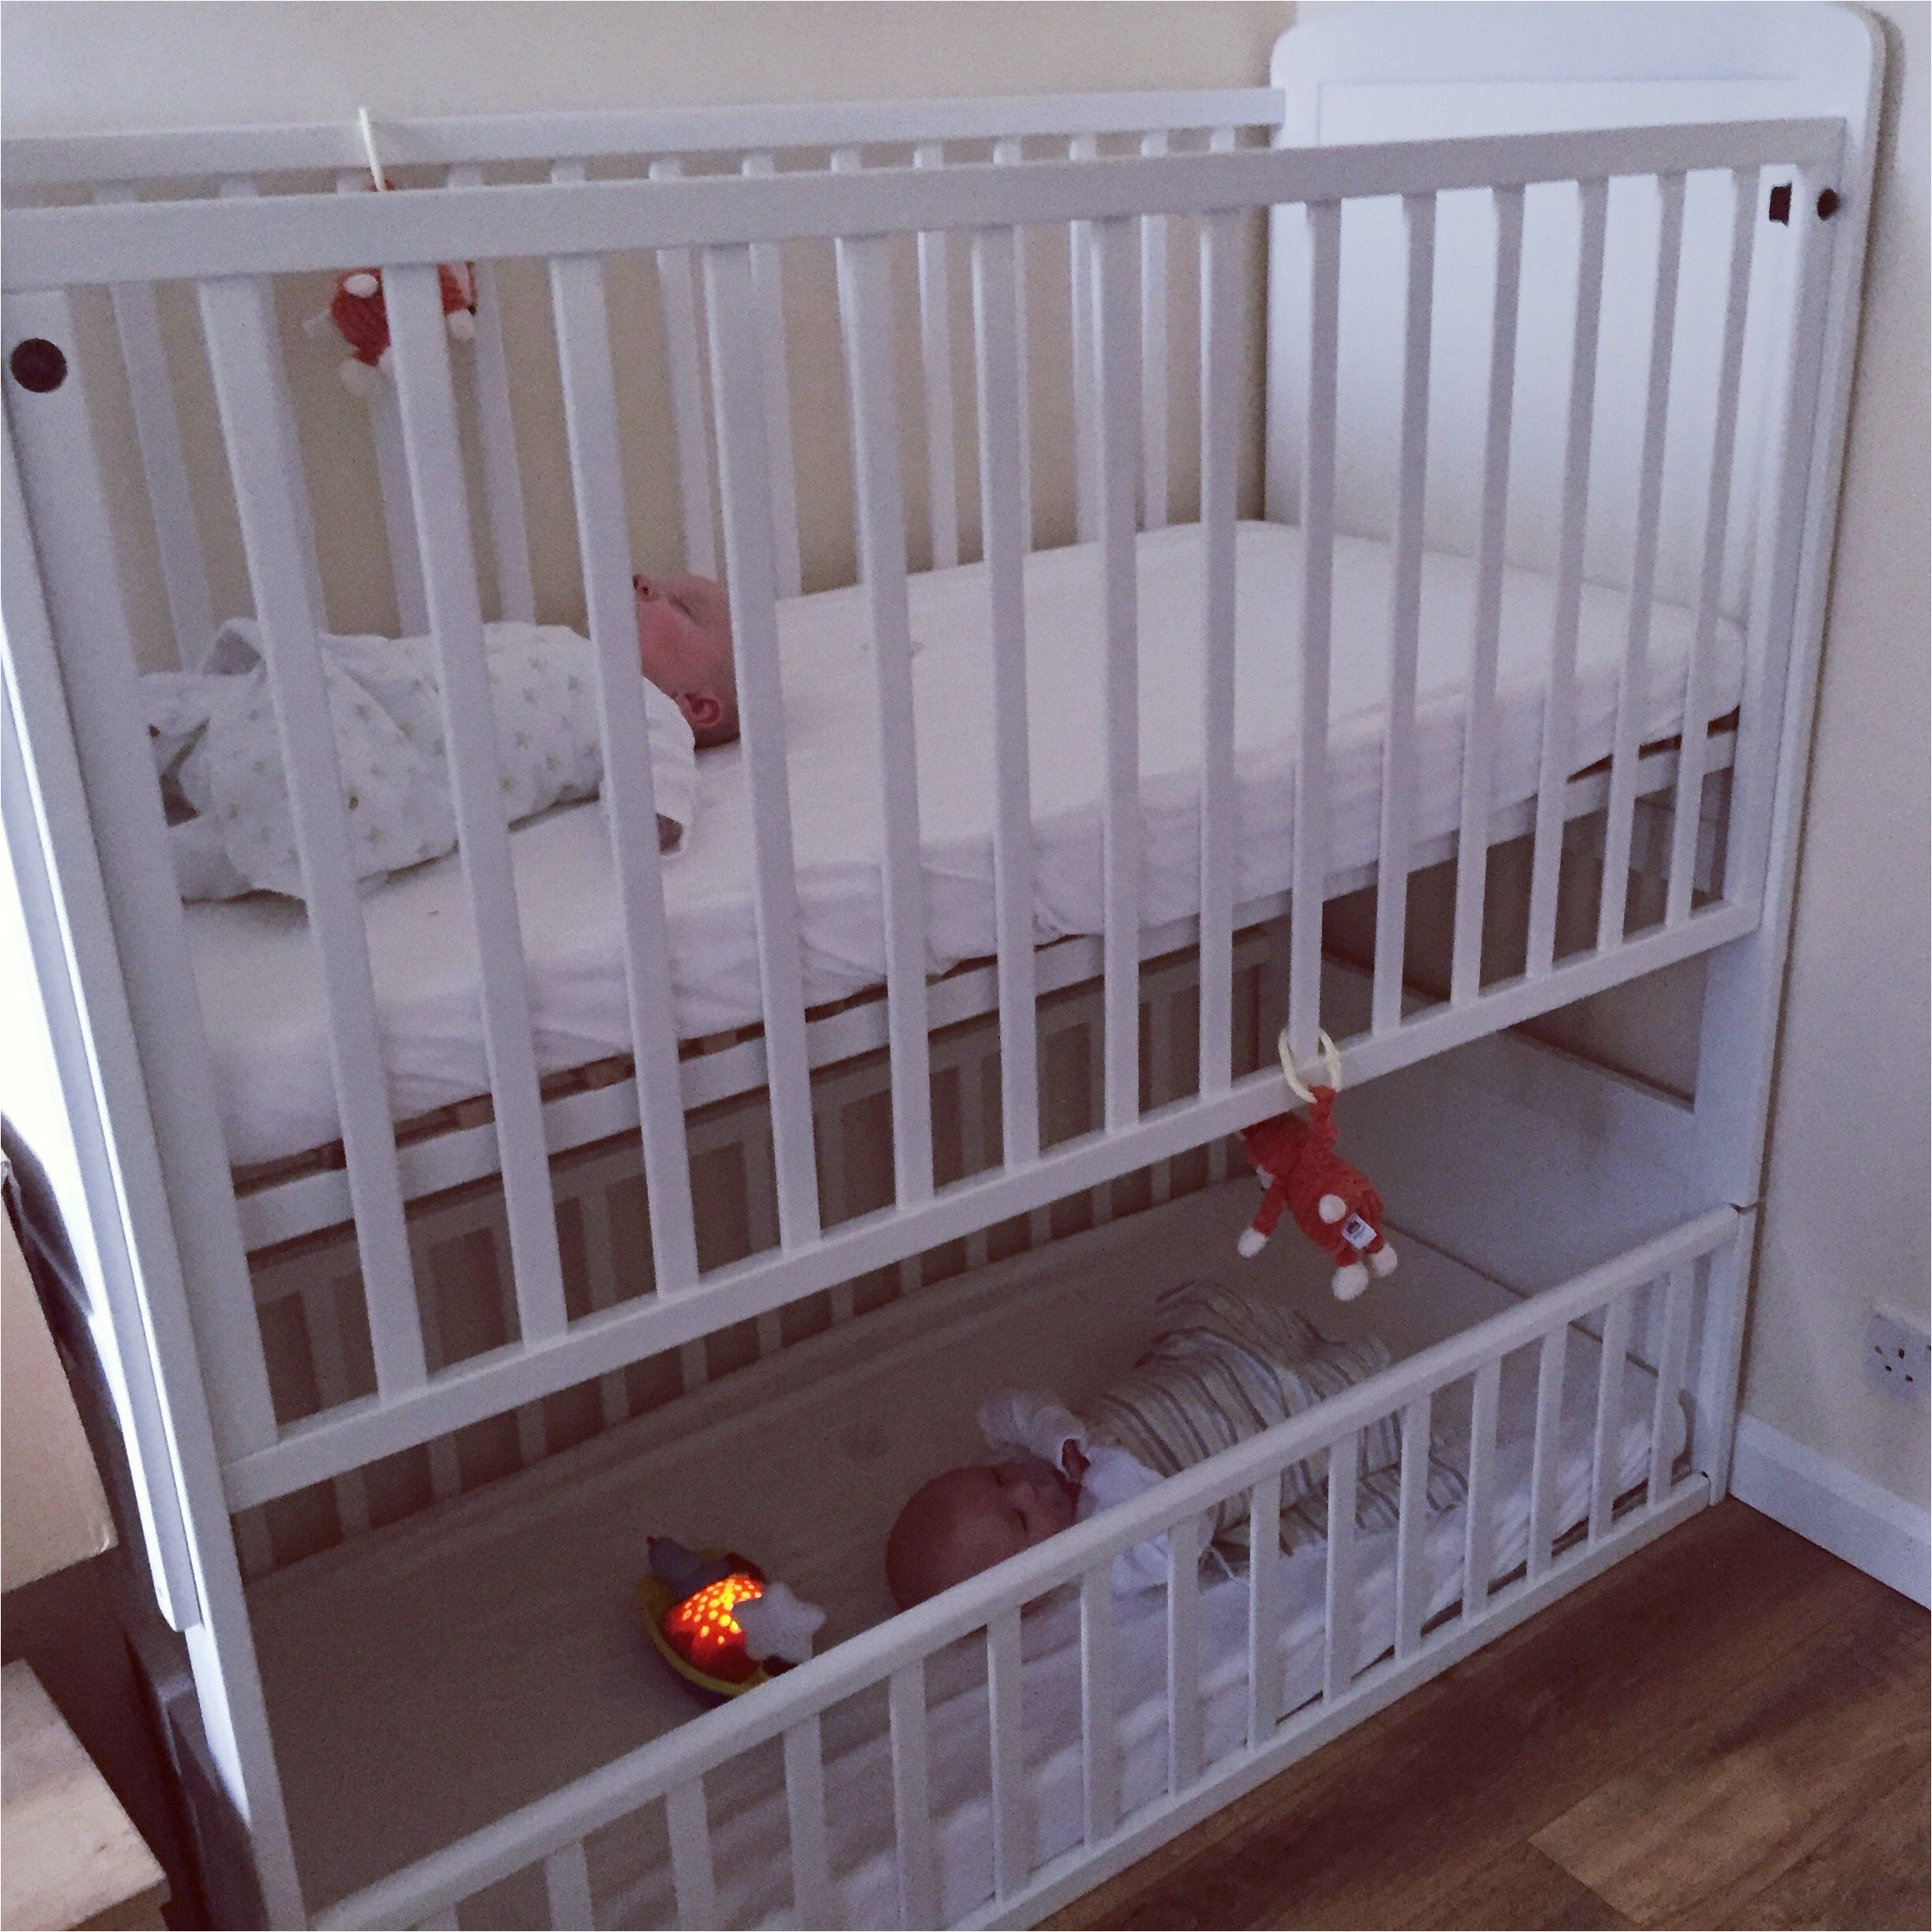 a bunk cot for twins or siblings close in age perfect if you are looking for space saving equipment